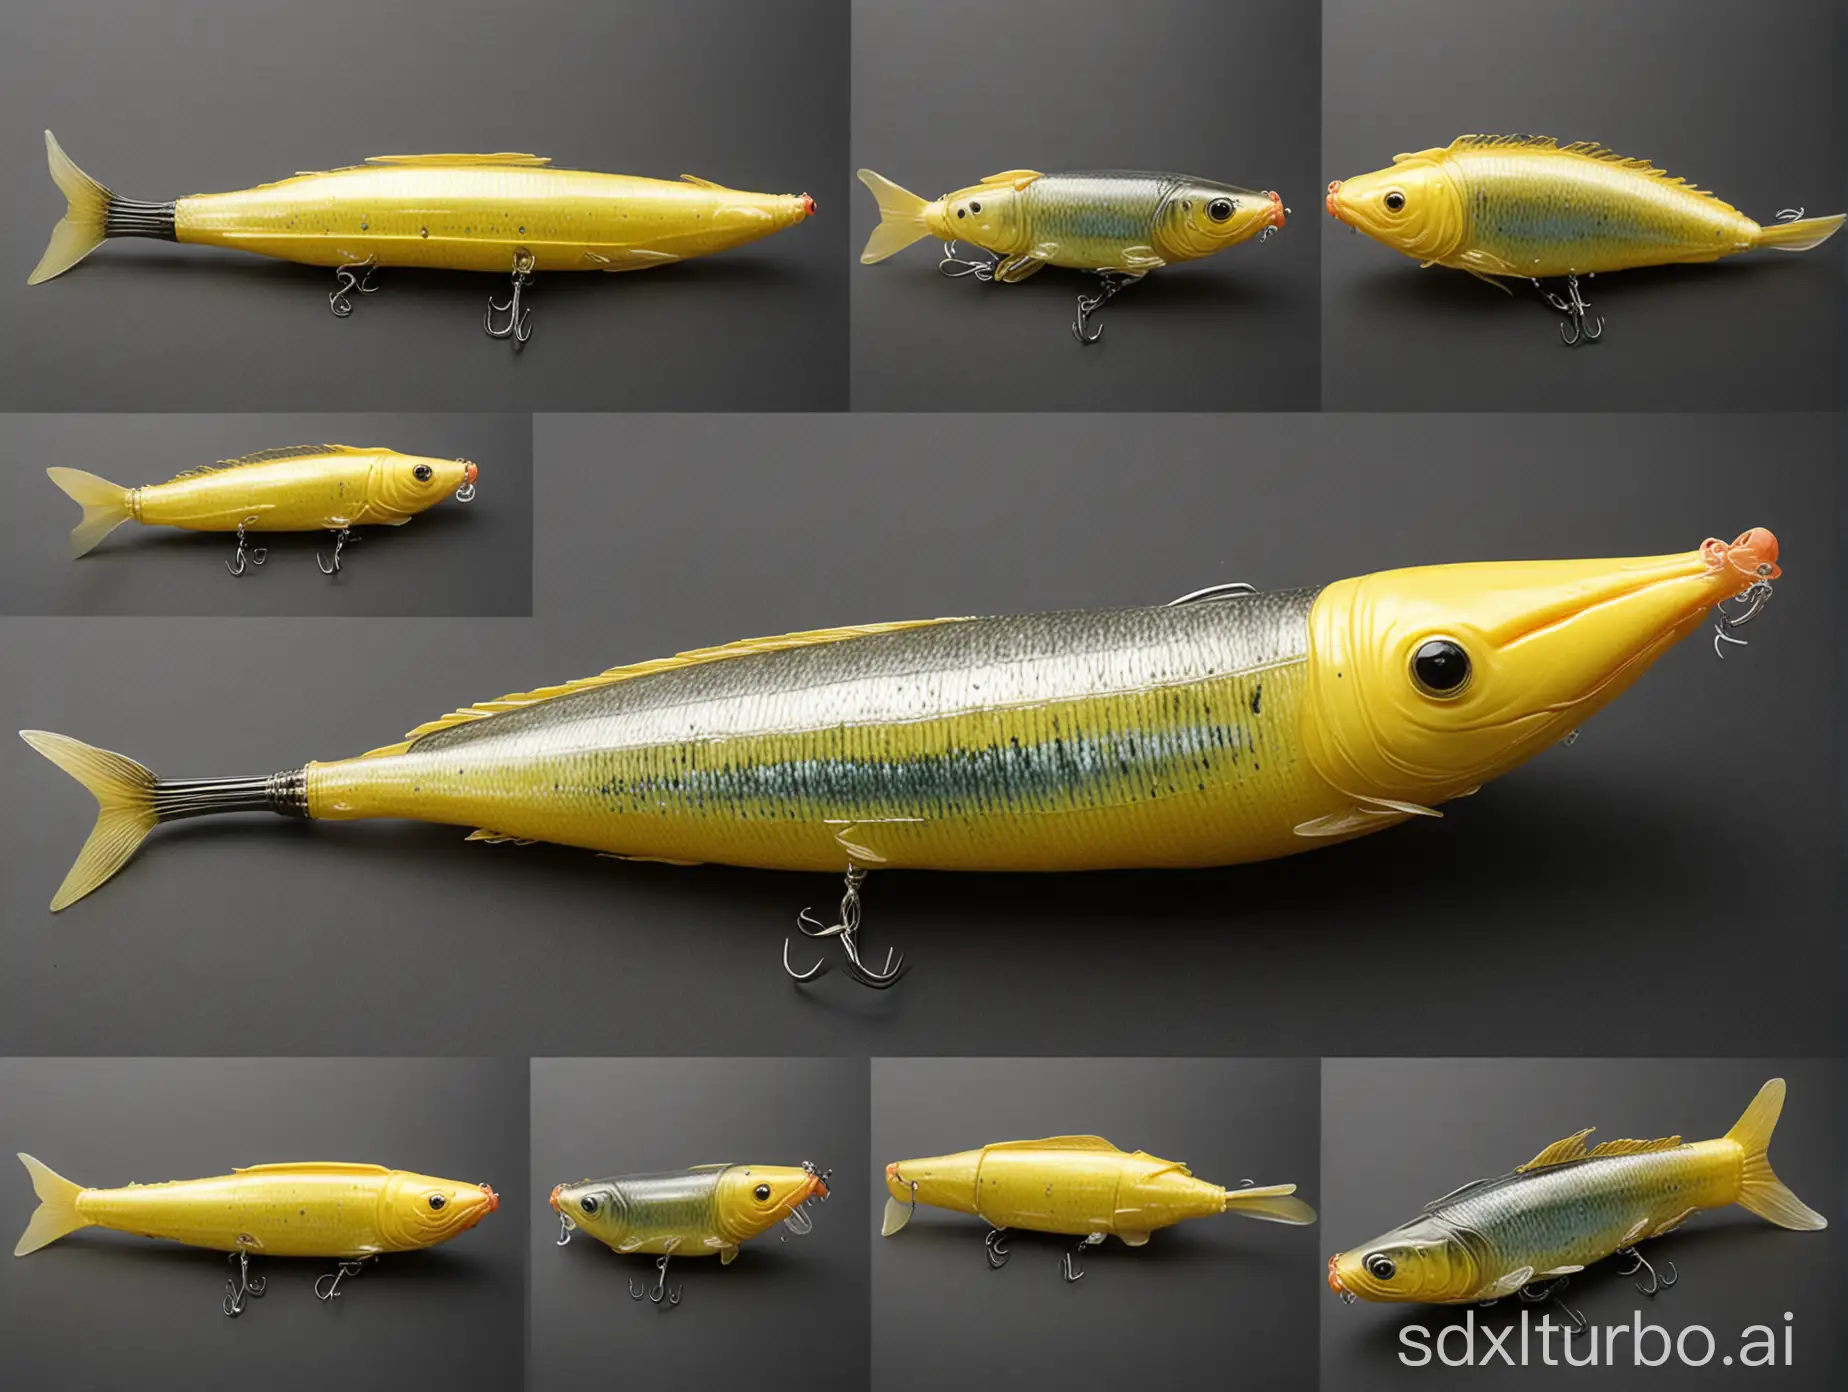 Artificial lure shaped like a banana and with details of a real fish.